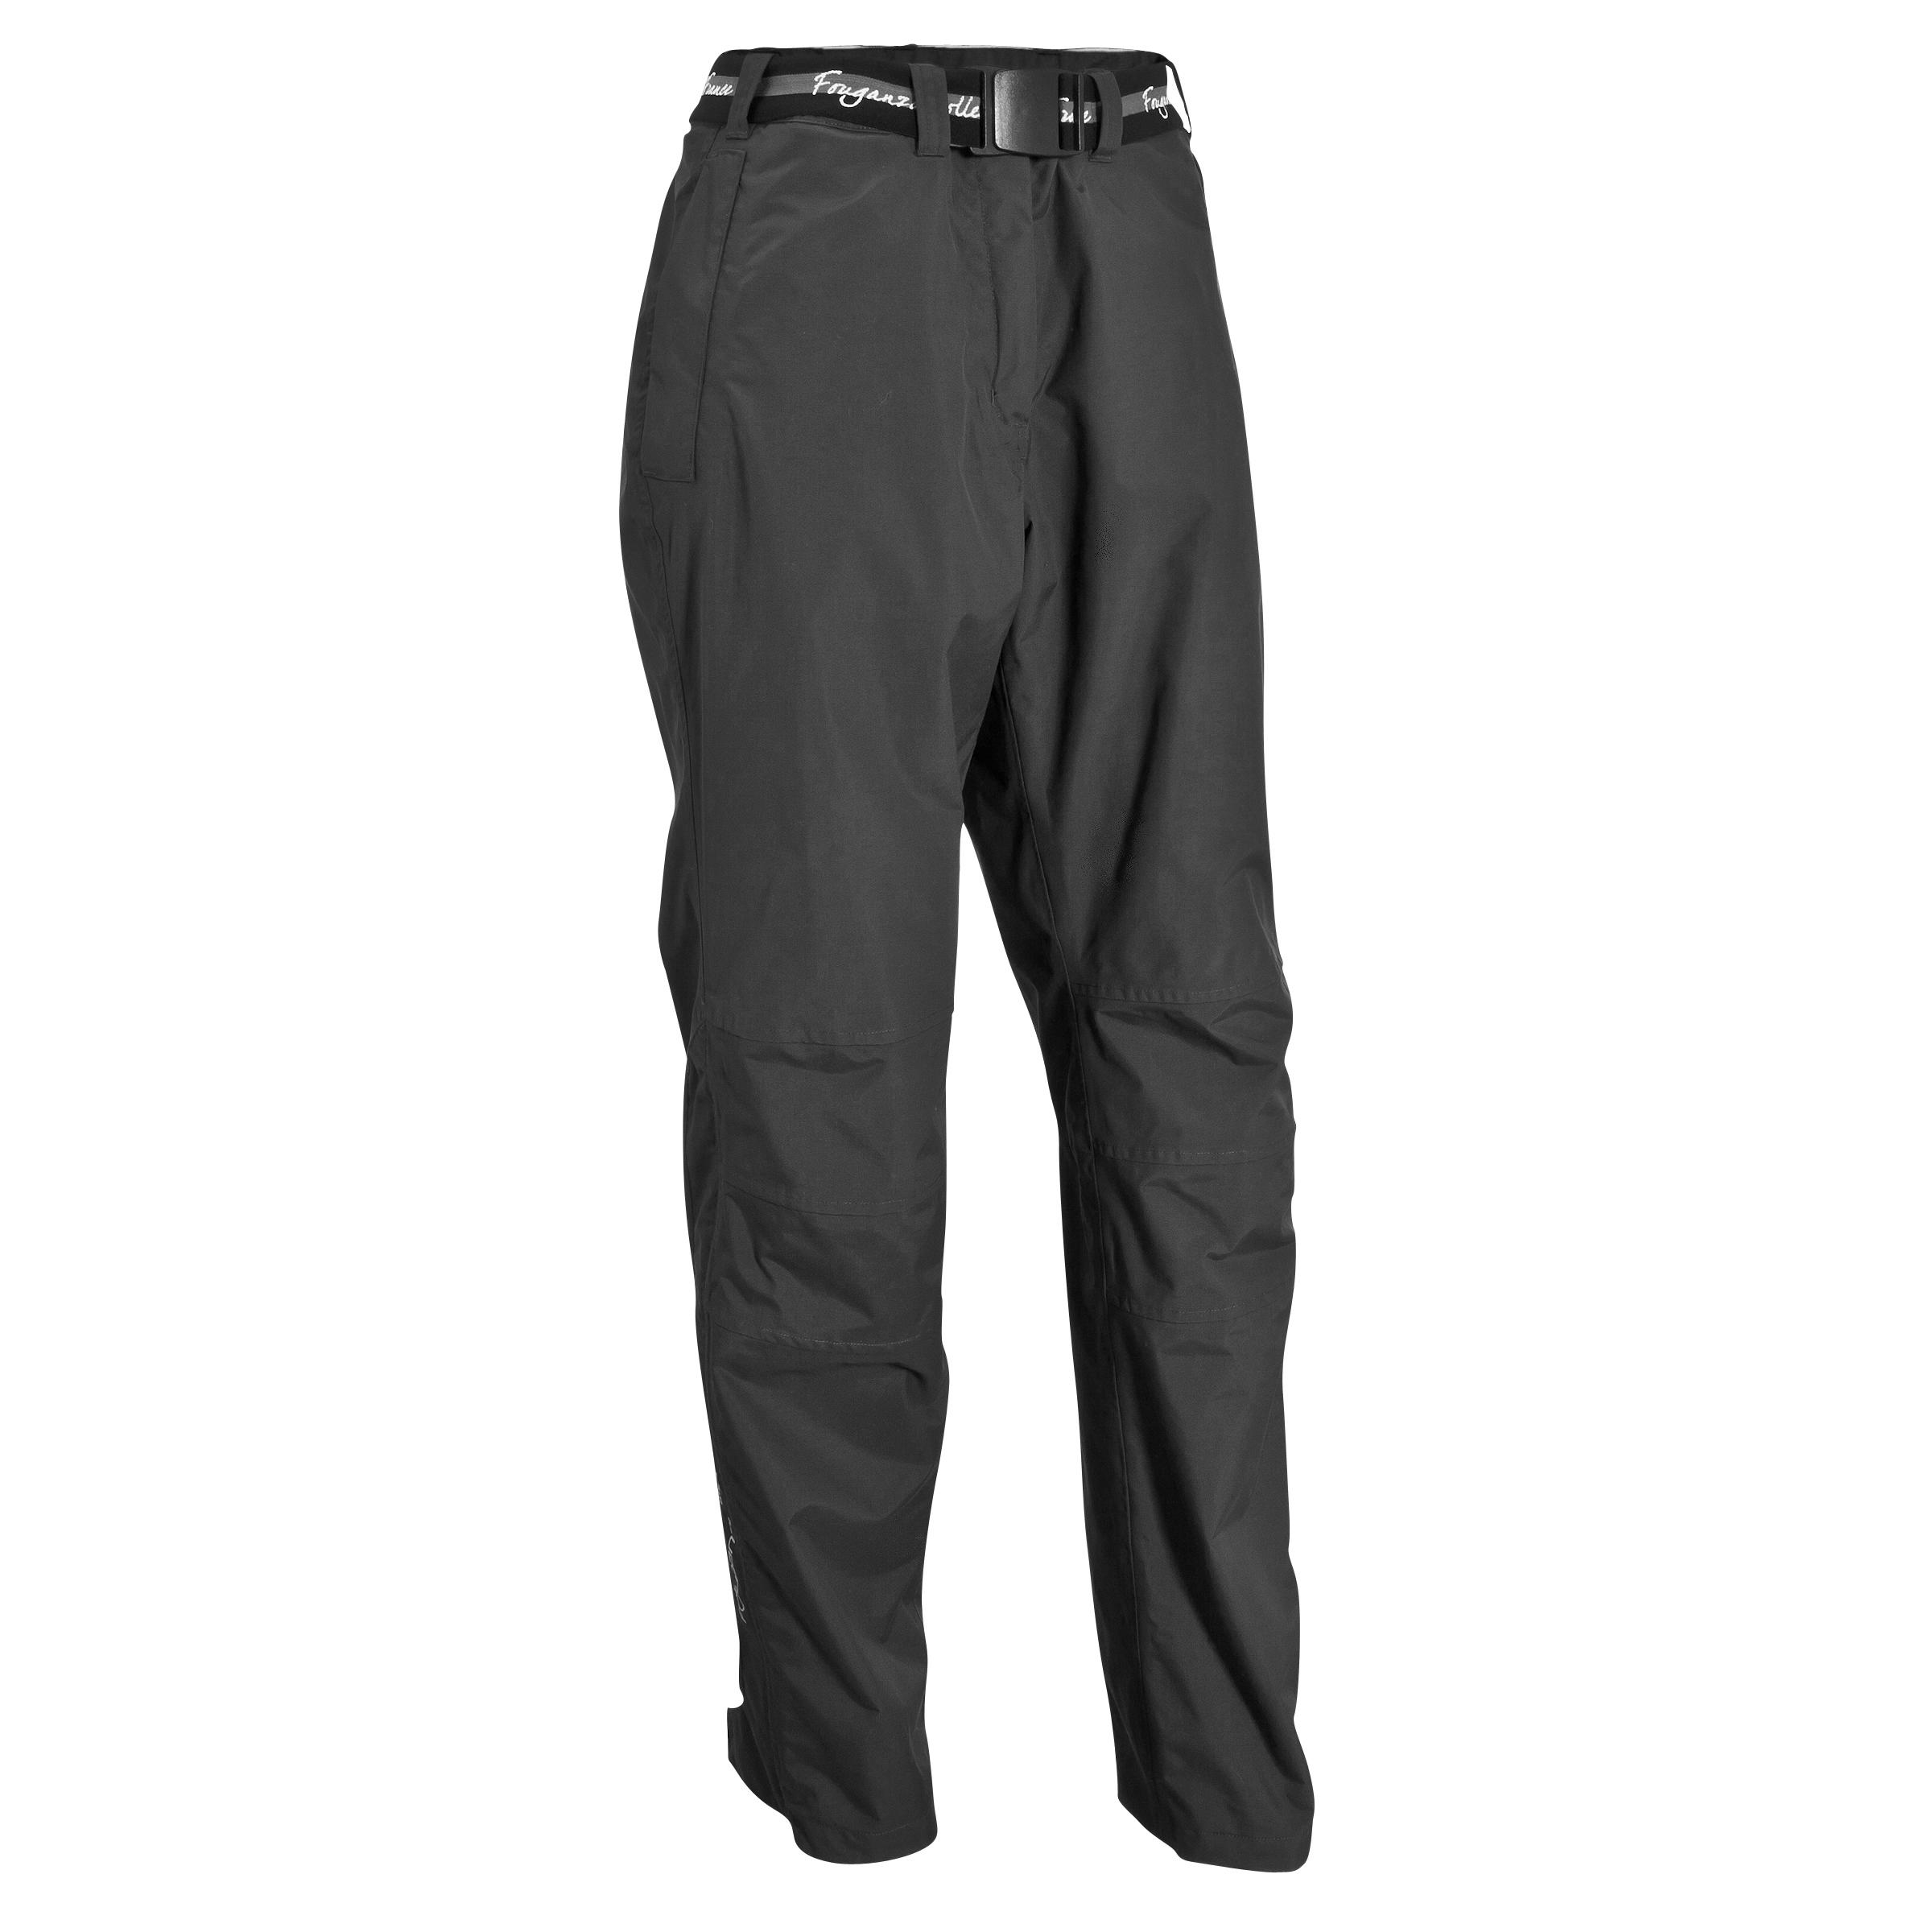 500 Adult 2-in1 Waterproof Horse Riding Overtrousers - Black 1/14